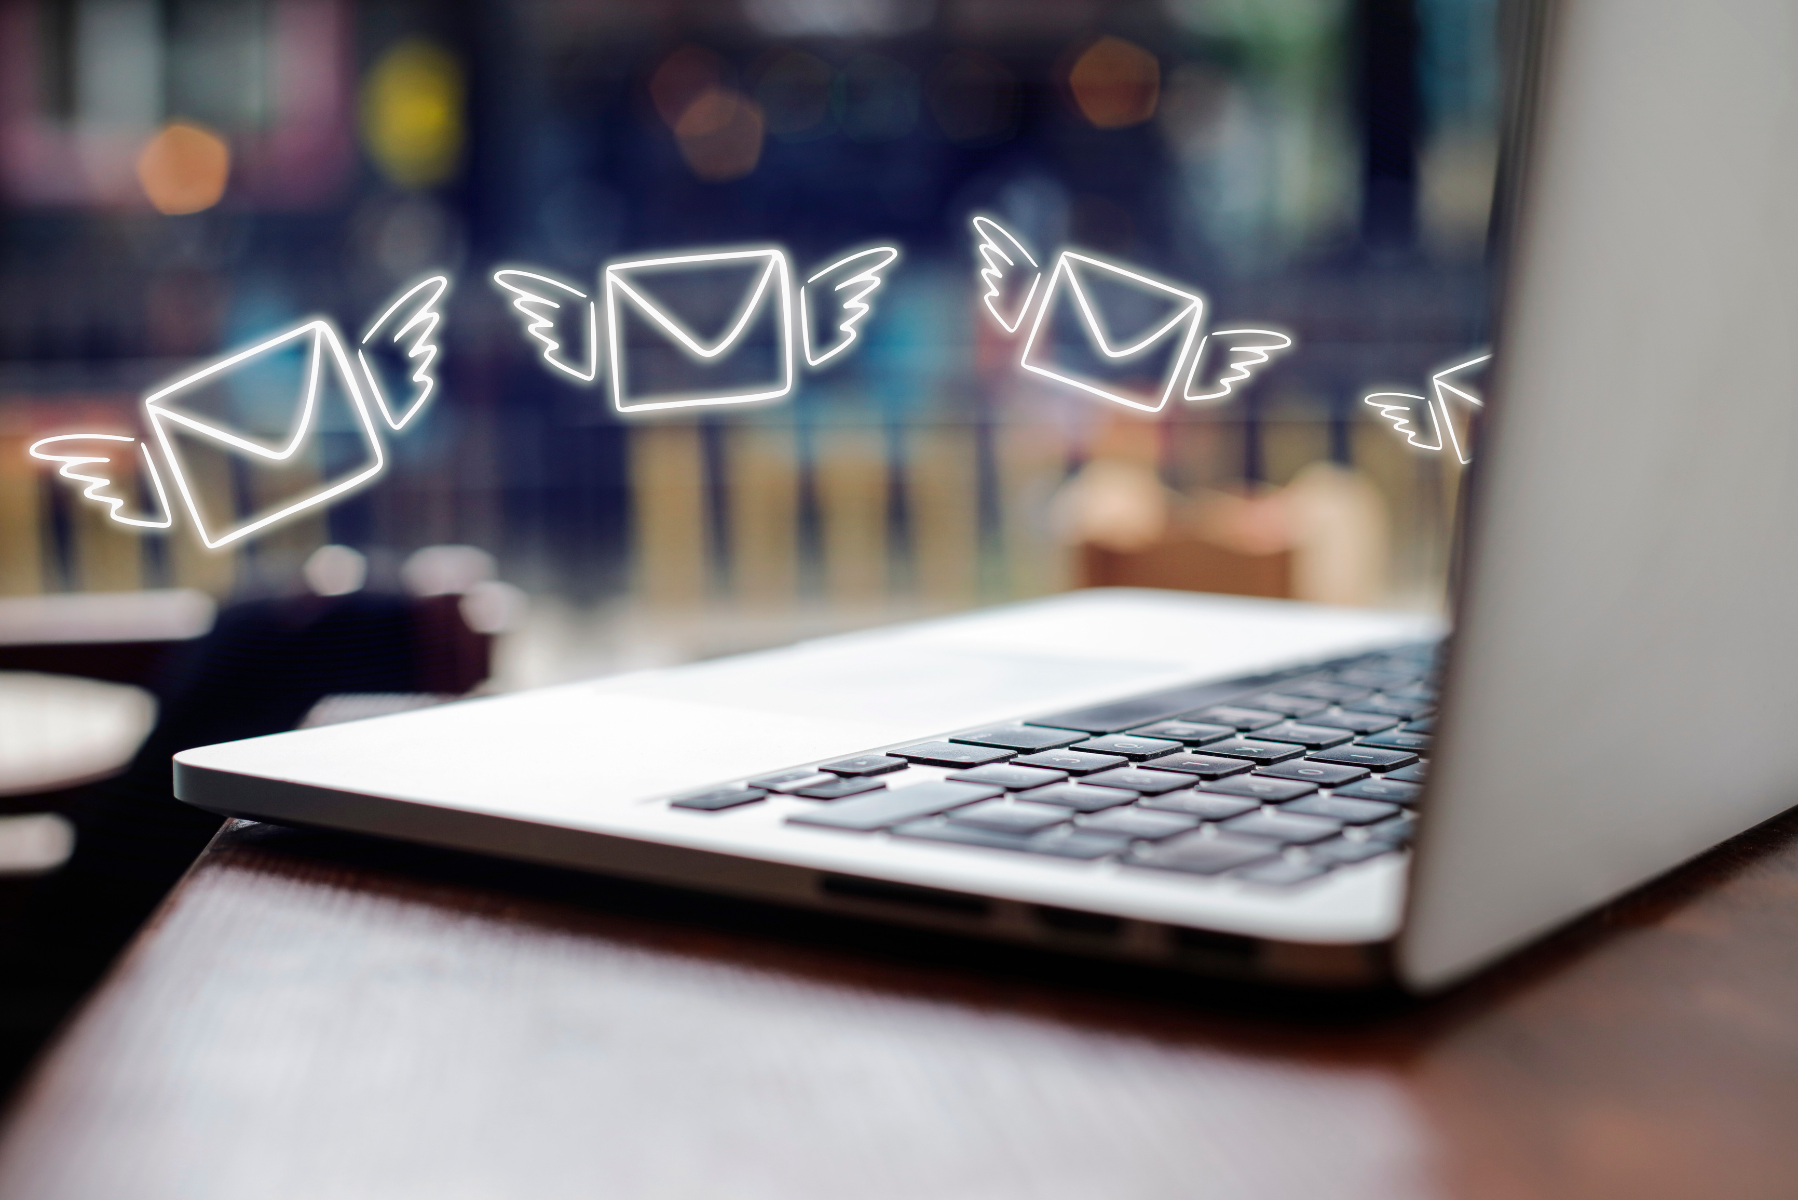 6 Recommended How-To Articles On Newsletter Sign-Ups